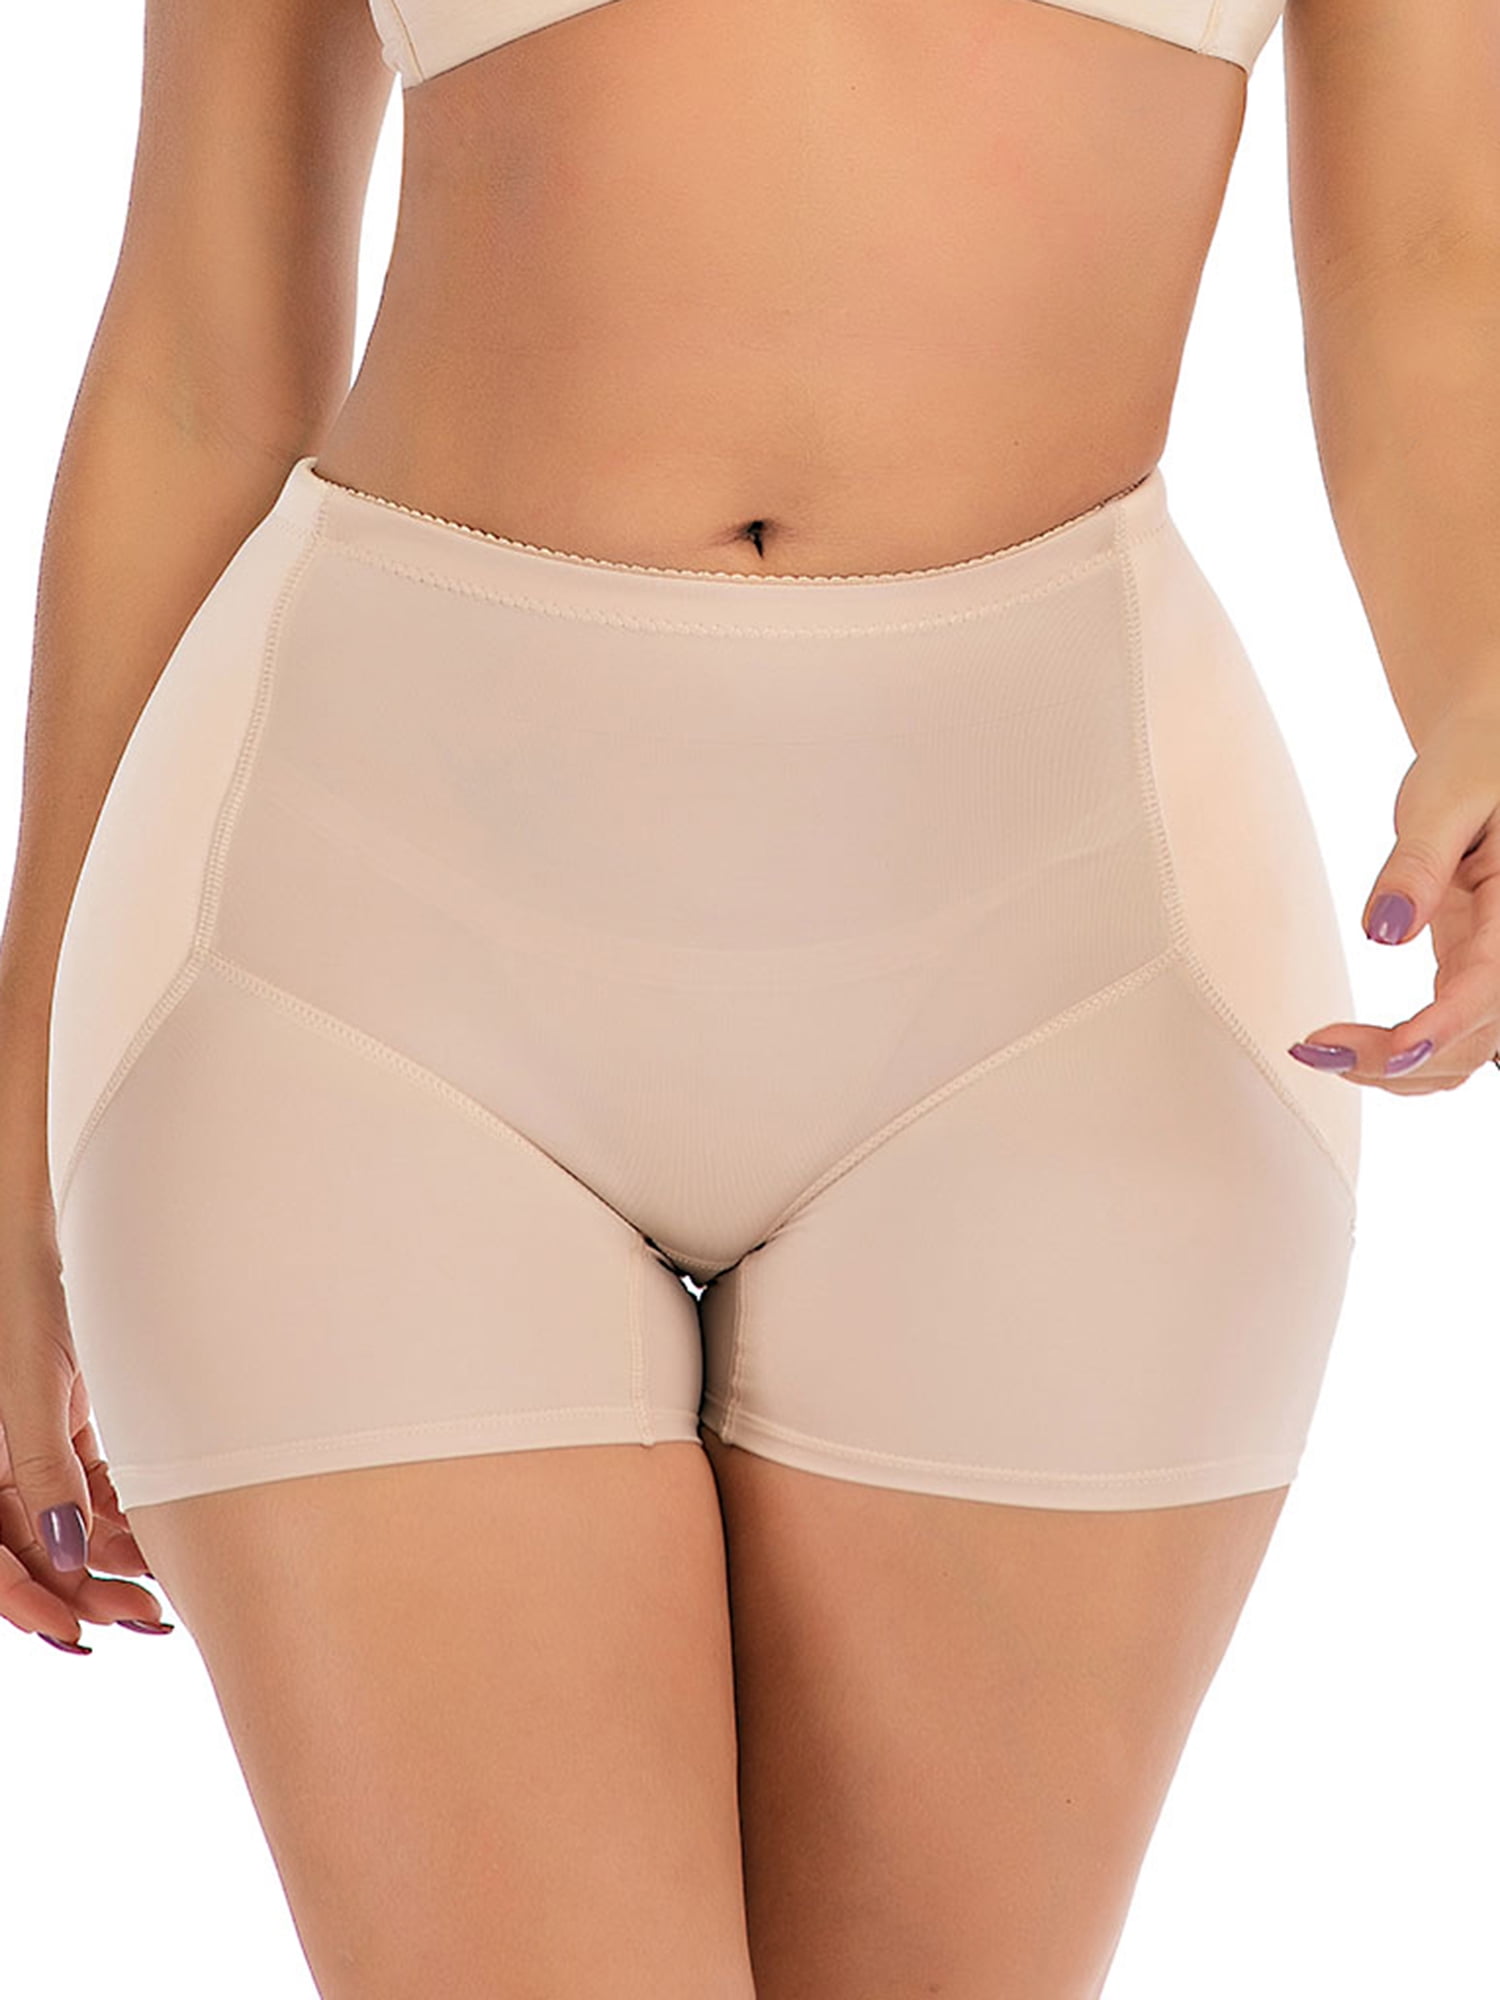 Lady Butt Lift Underwear Panty Booster Enhancer Shapers Buttock Padded Fake Ass